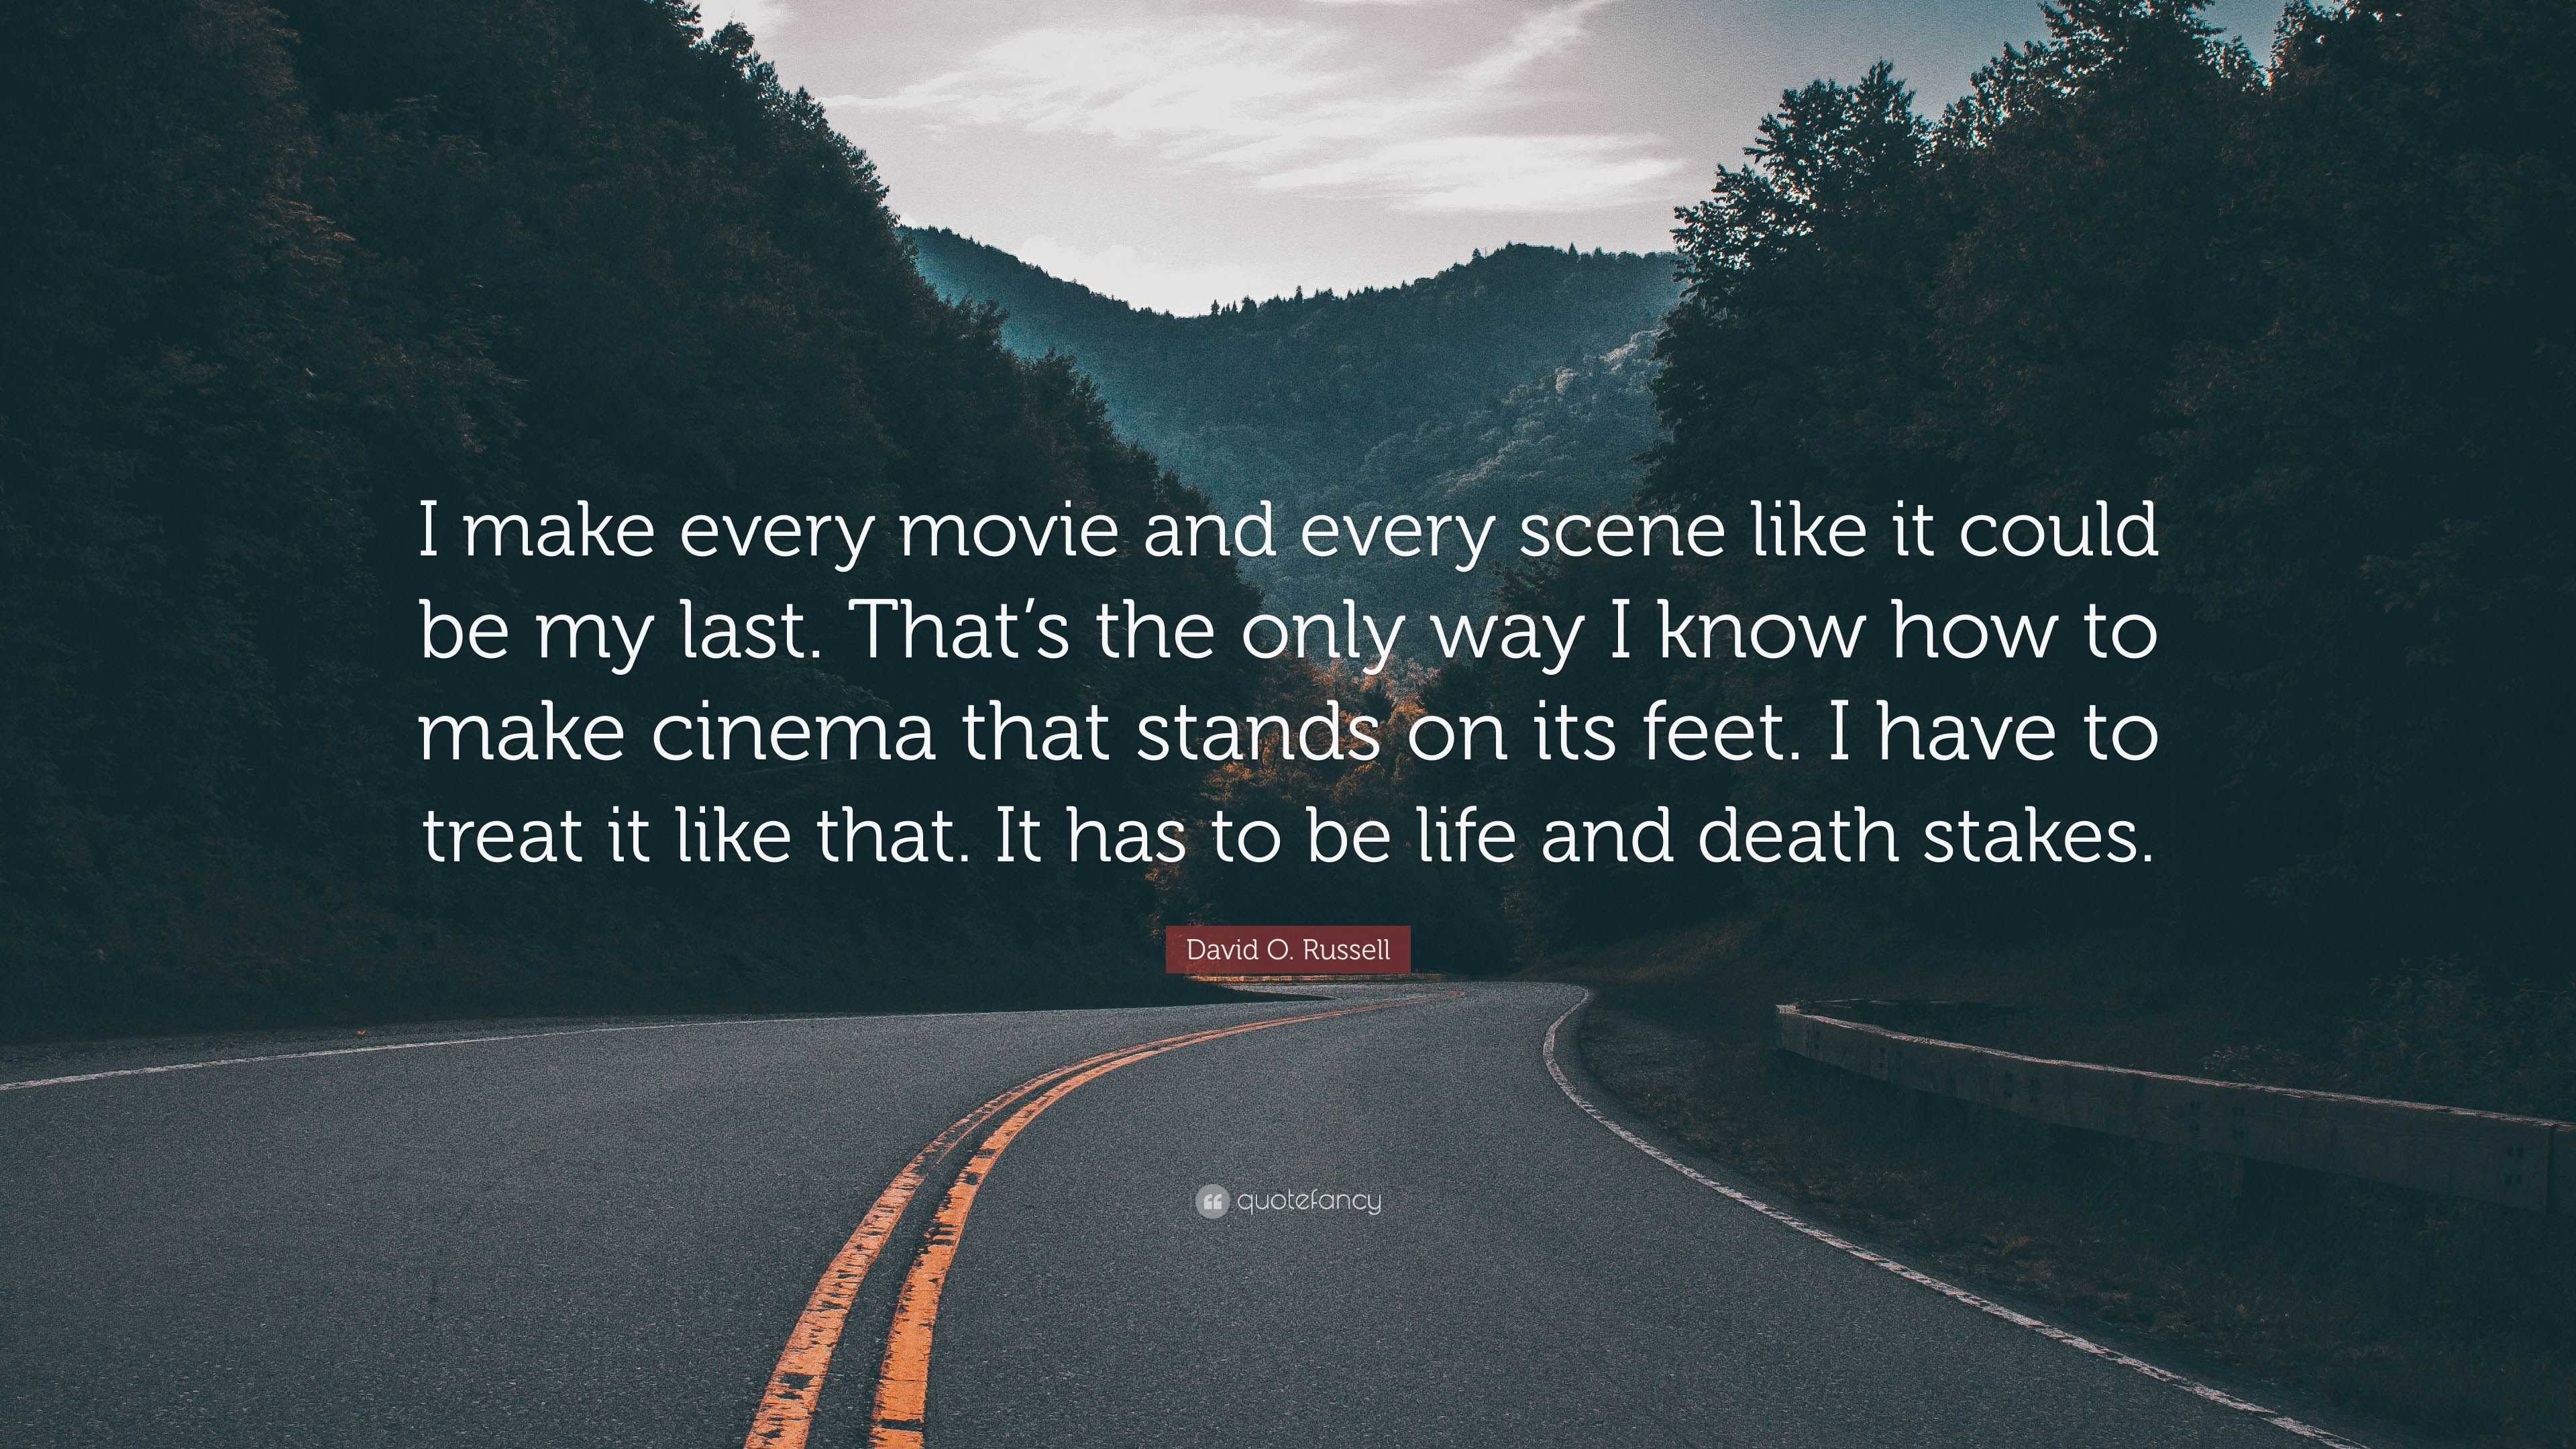 David O Russell Quote I Make Every Movie And Every Scene Like It Could Be My Last That S The Only Way I Know How To Make Cinema That Stands O 7 Wallpapers